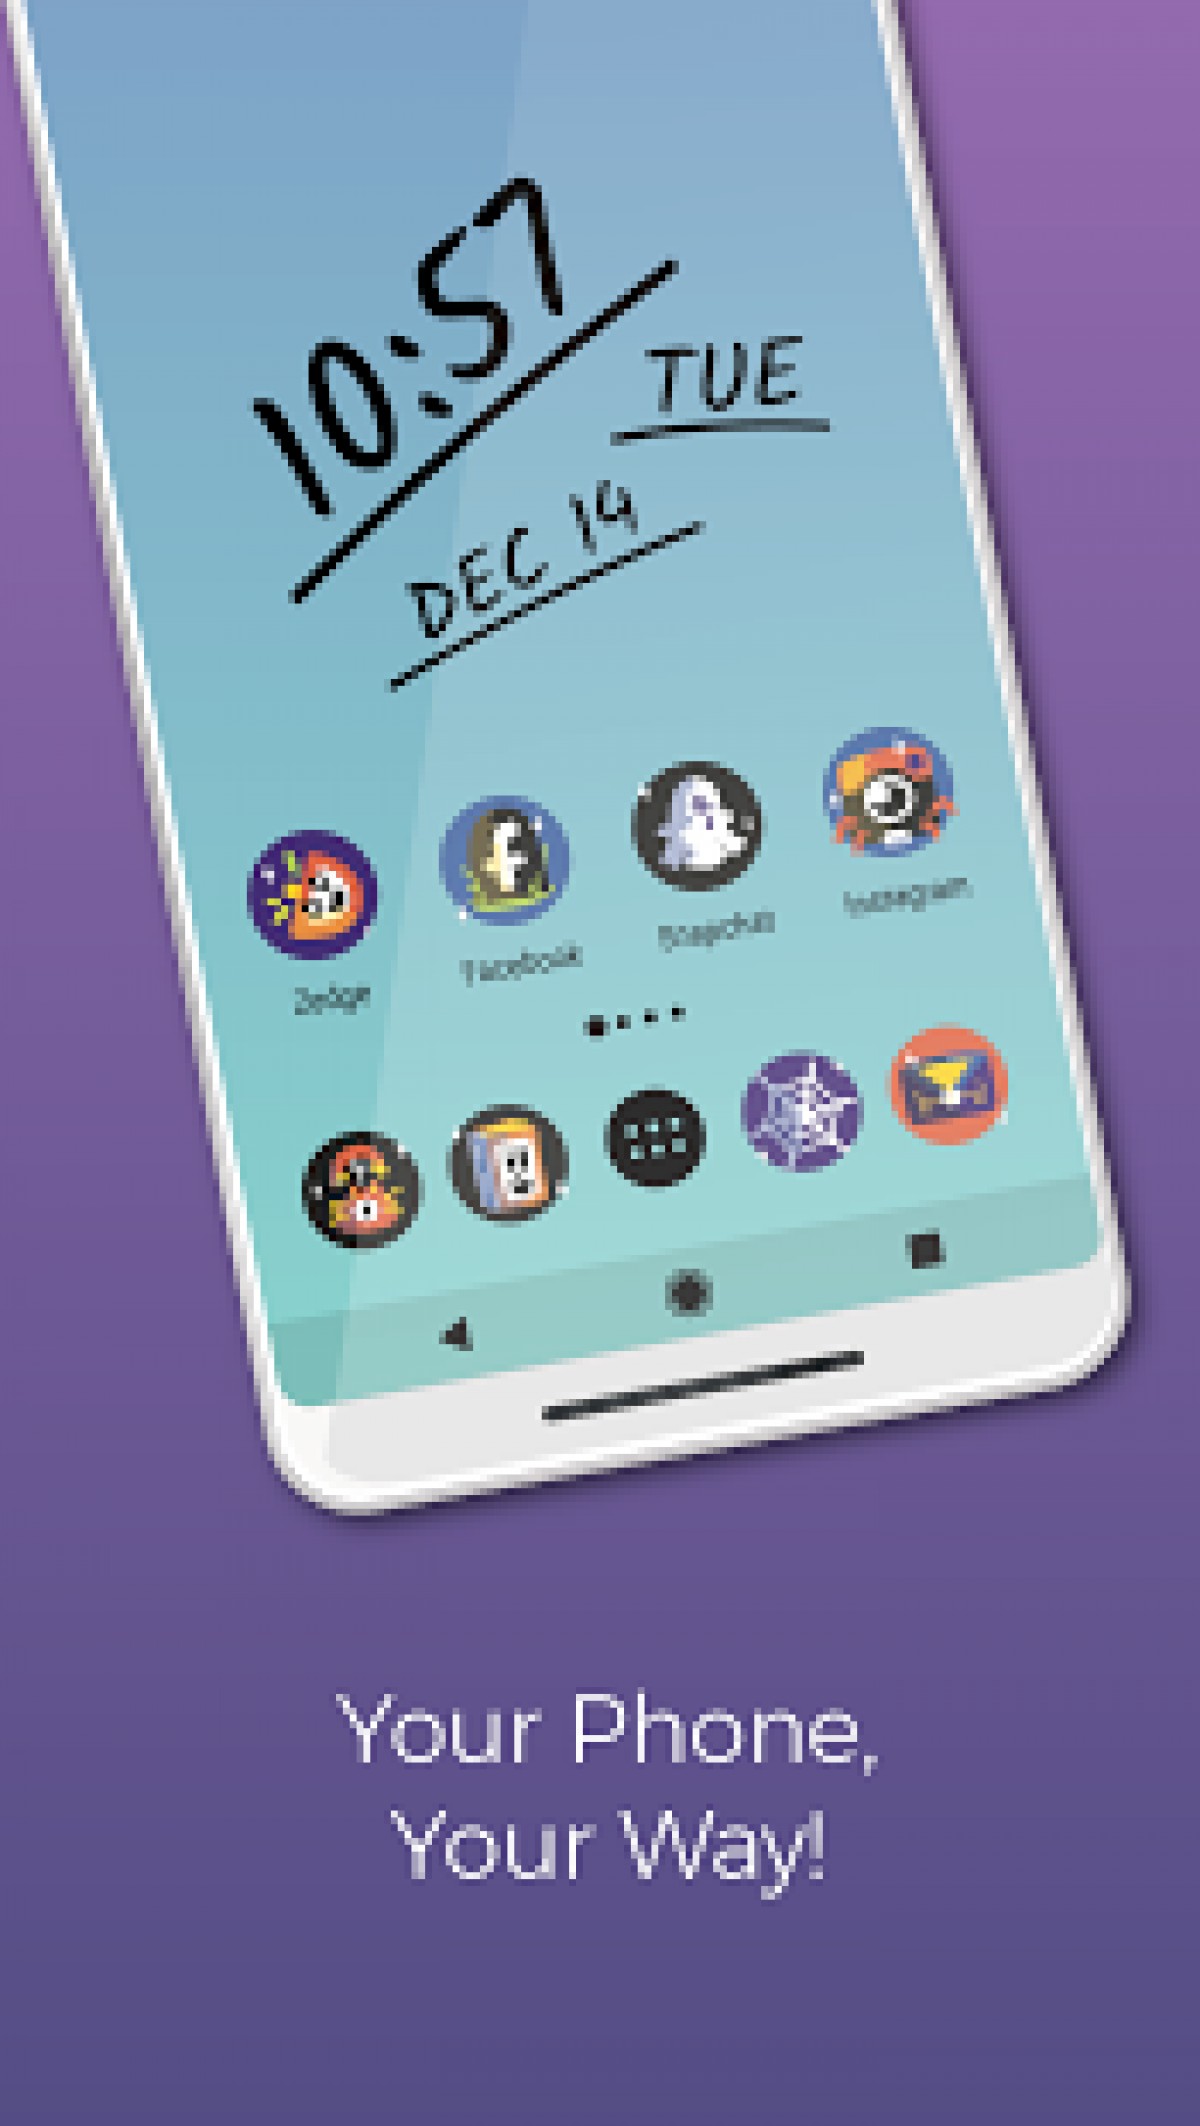 Zedge Ringtones &amp - Android Application Package - HD Wallpaper 